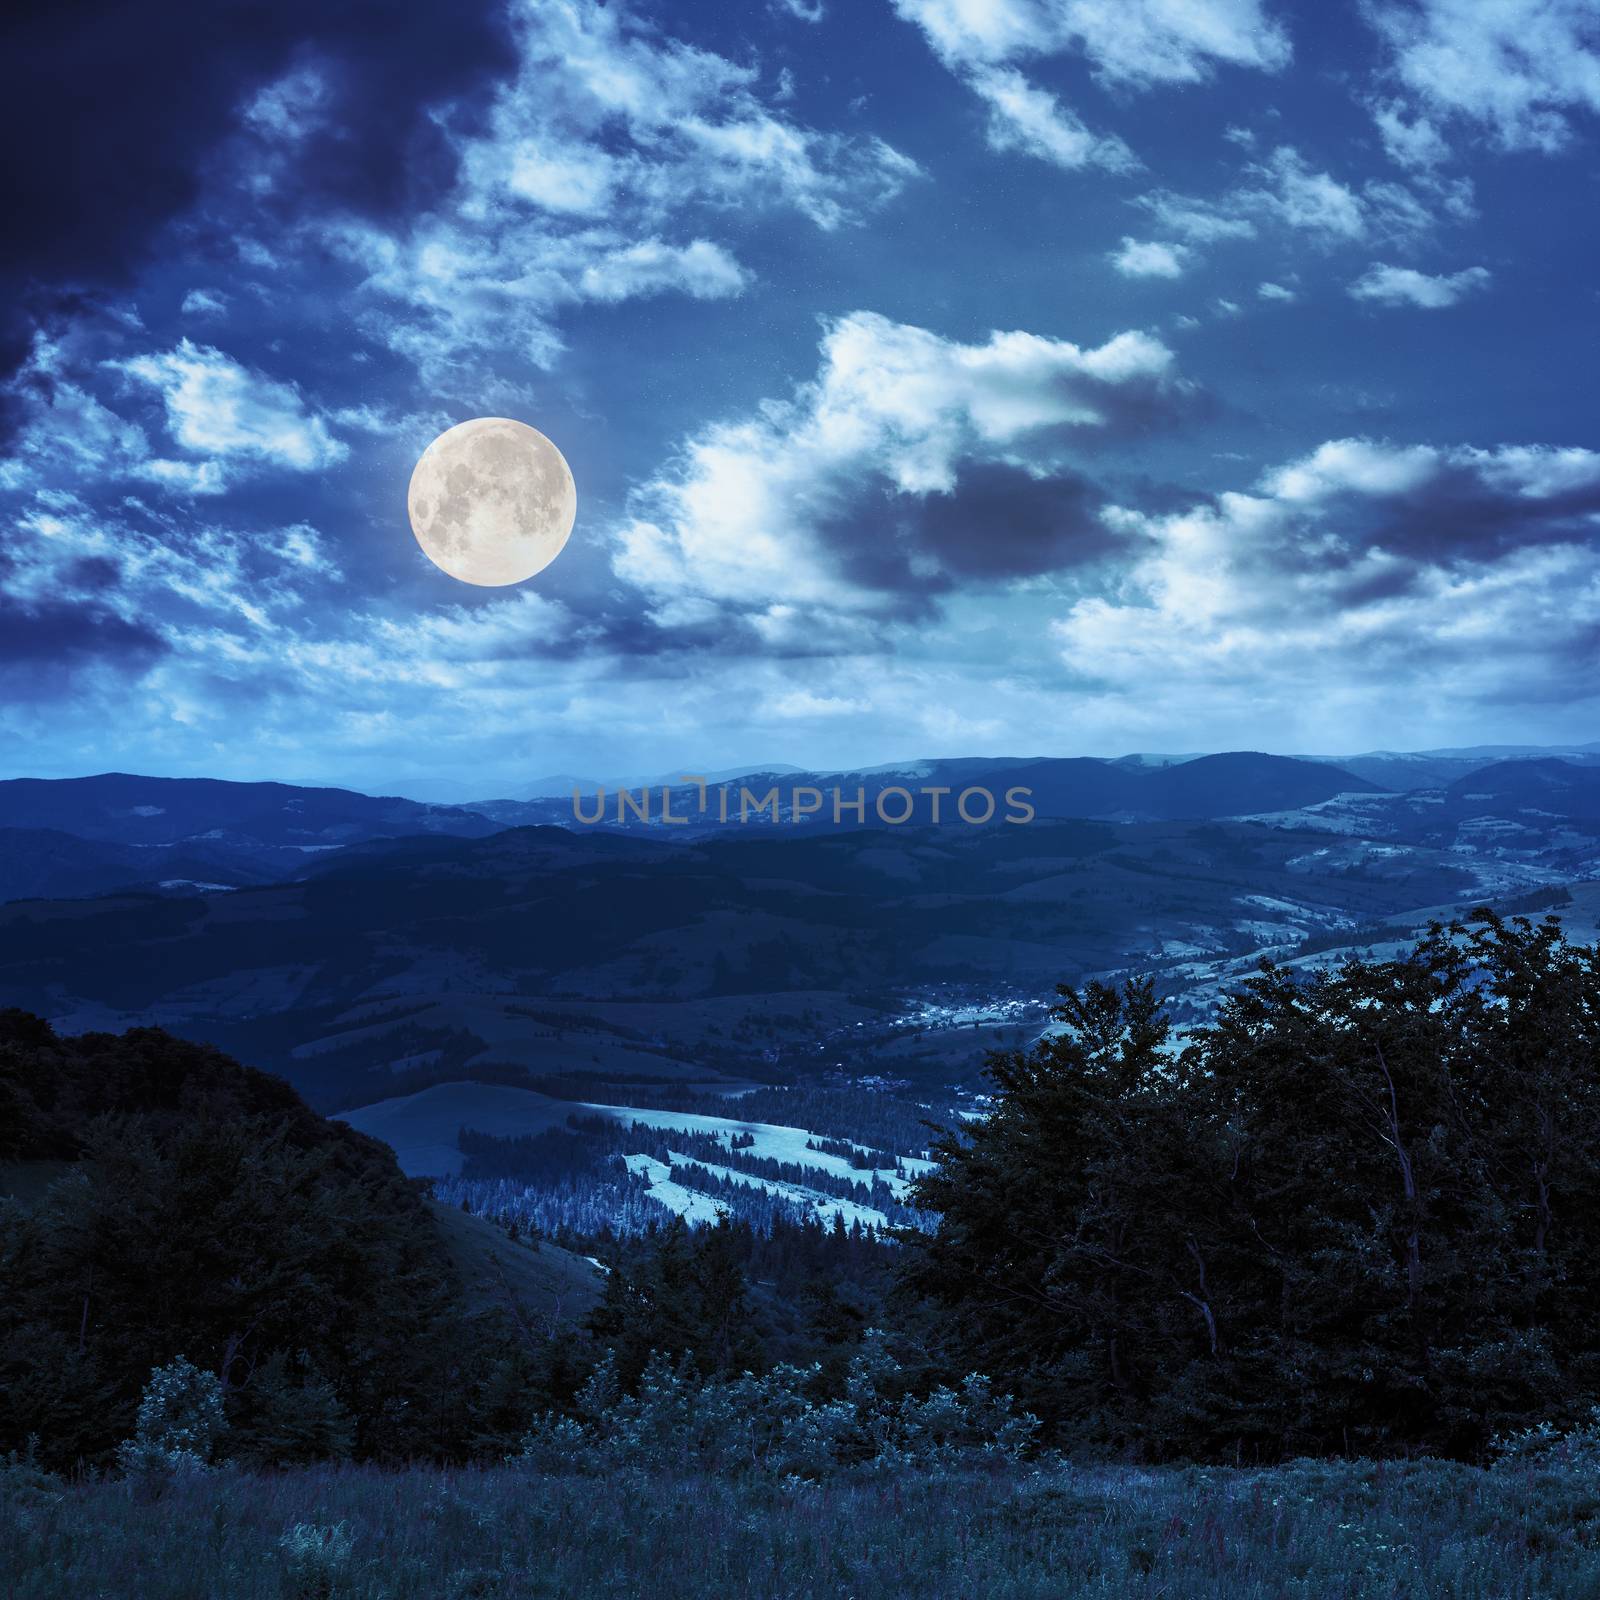 summer landscape. village in valley at the mountain foot is seen behind the trees on mountain slope at night in full moon light